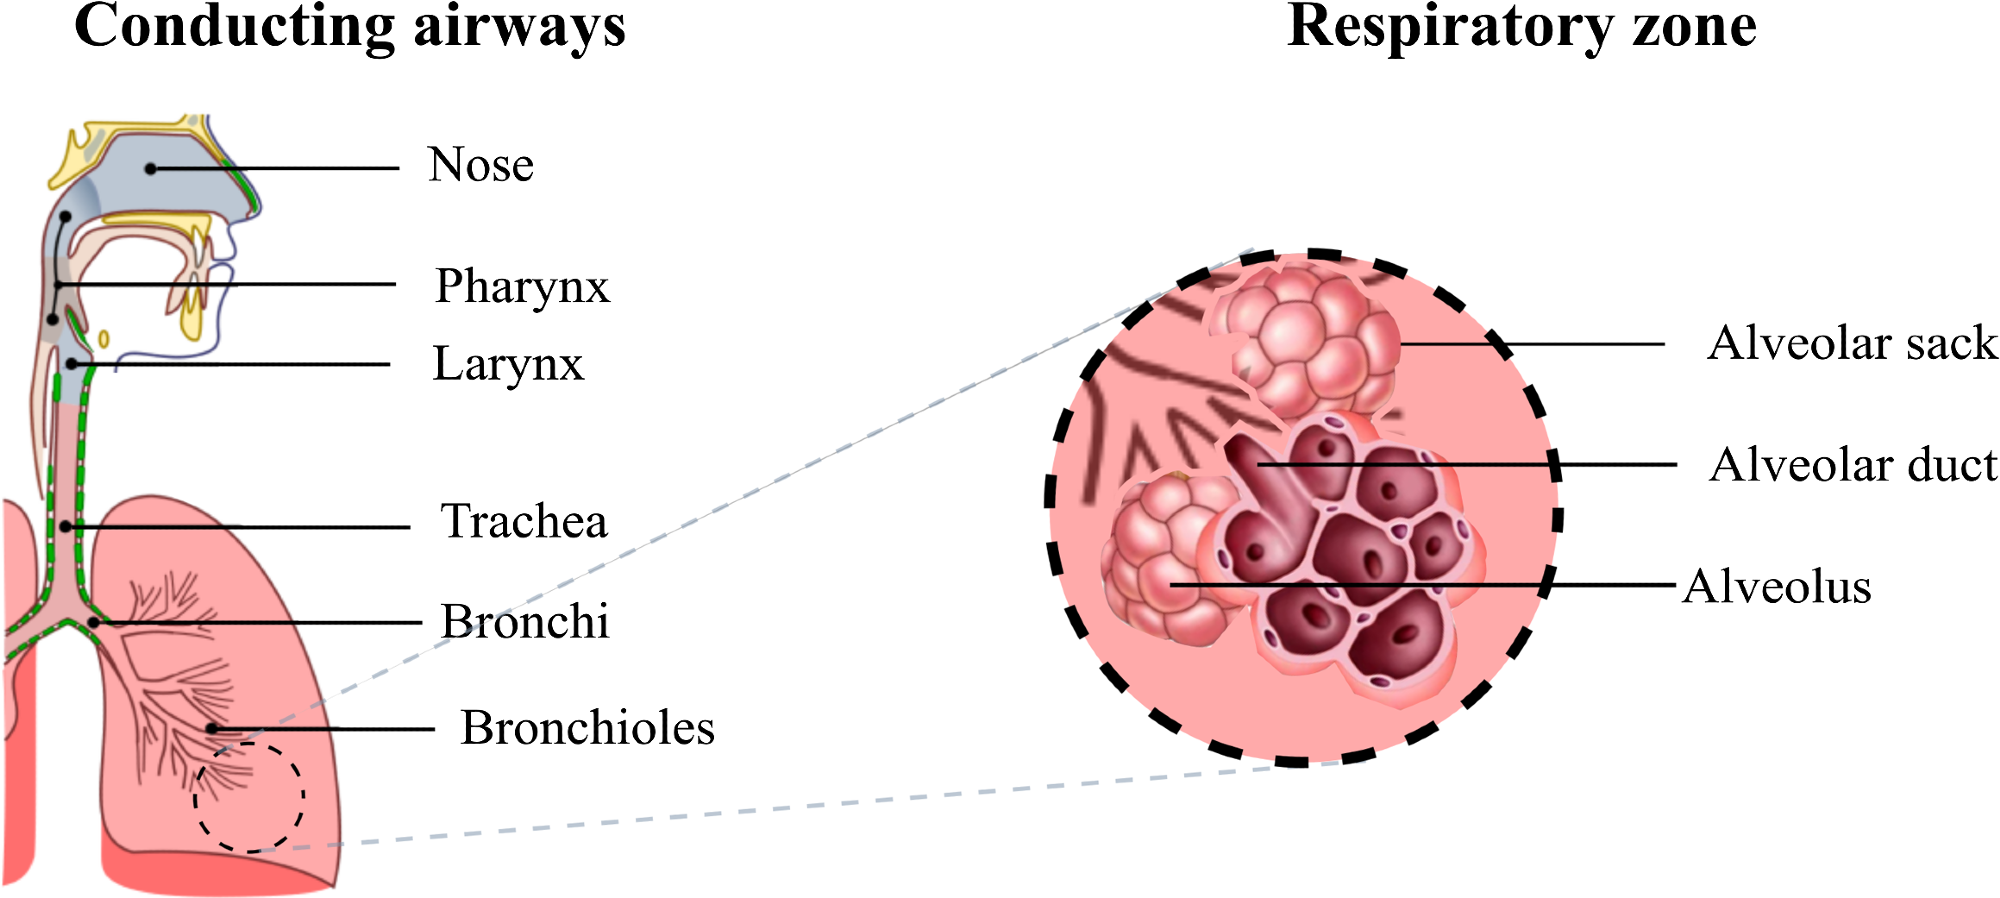 Diagram of the respiratory airways. The conducting airways warm up and moisten the inhaled air, the gas exchange occurs in the respiratory zone where the alveoli are located.